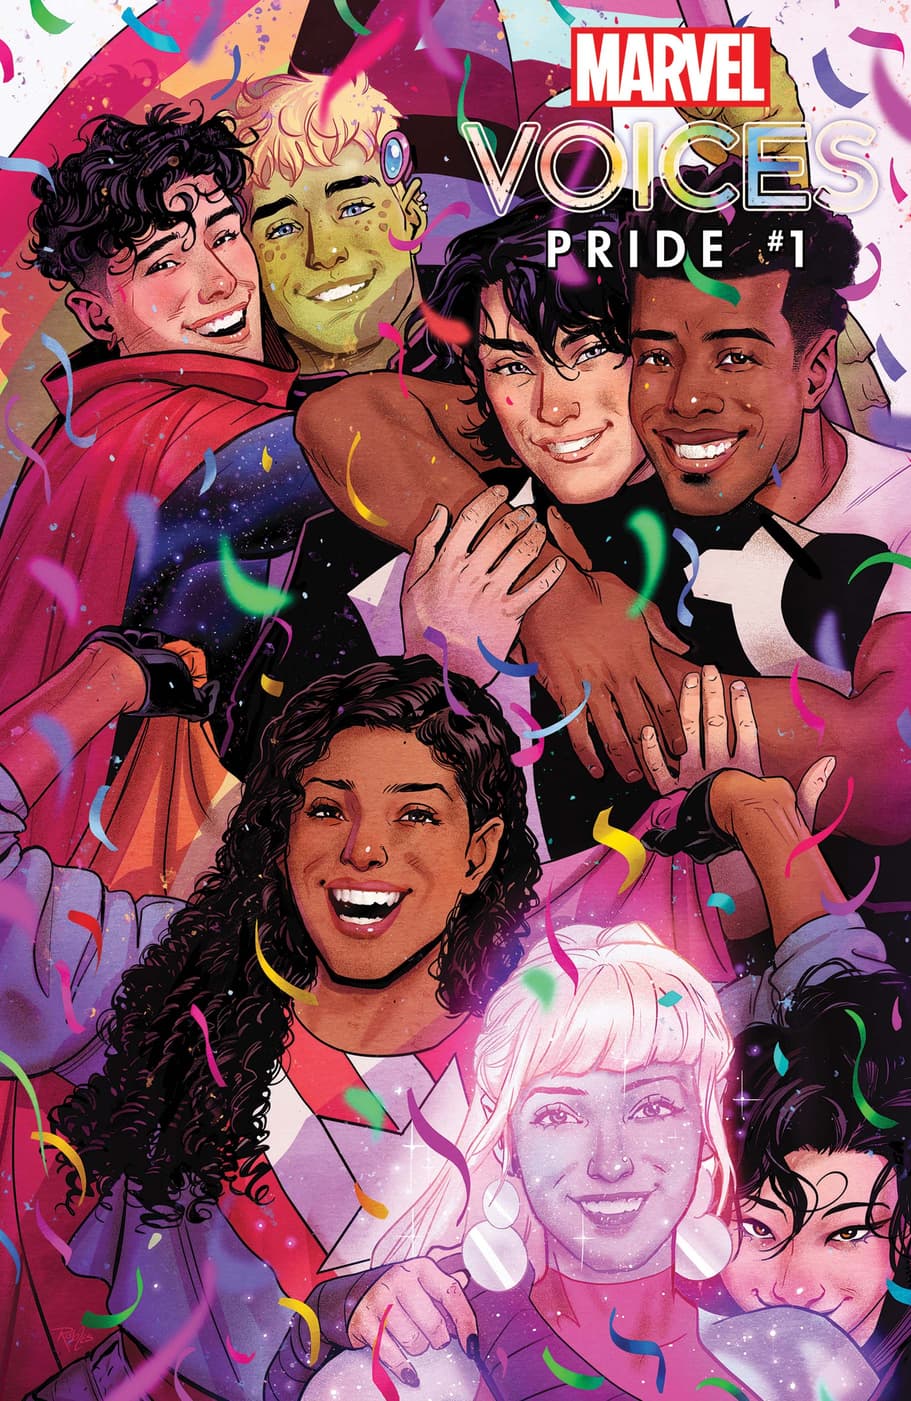 MARVEL'S VOICES: PRIDE (2022) #1 cover by Nick RoblesMARVEL'S VOICES: PRIDE (2022) #1 cover by Nick Robles